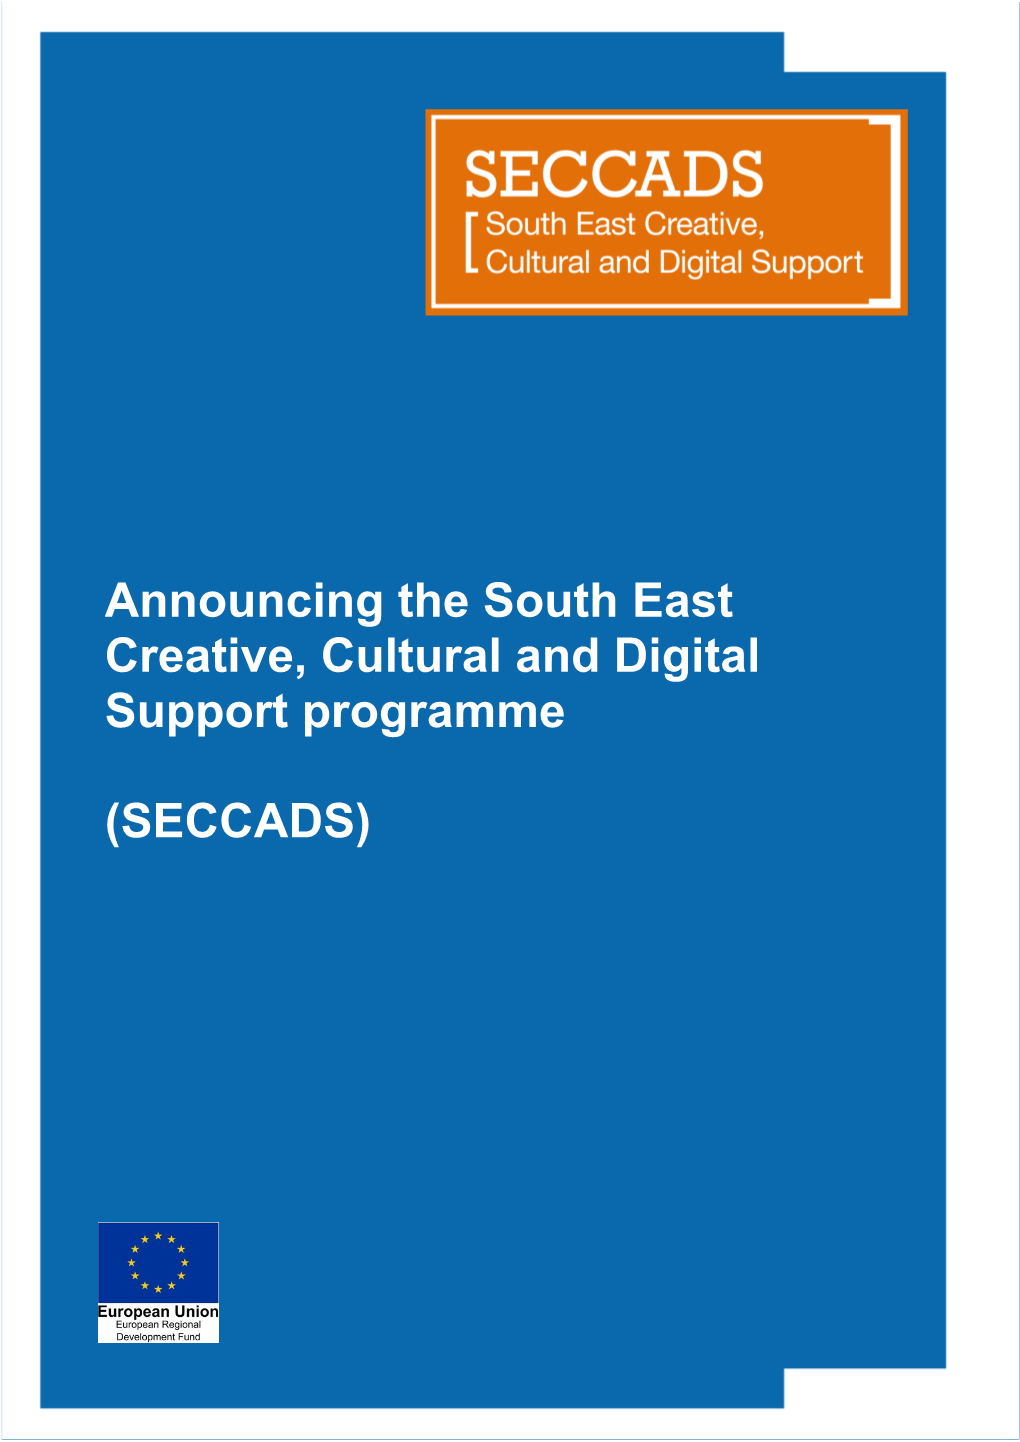 Announcing the South East Creative, Cultural and Digital Support Programme (SECCADS)